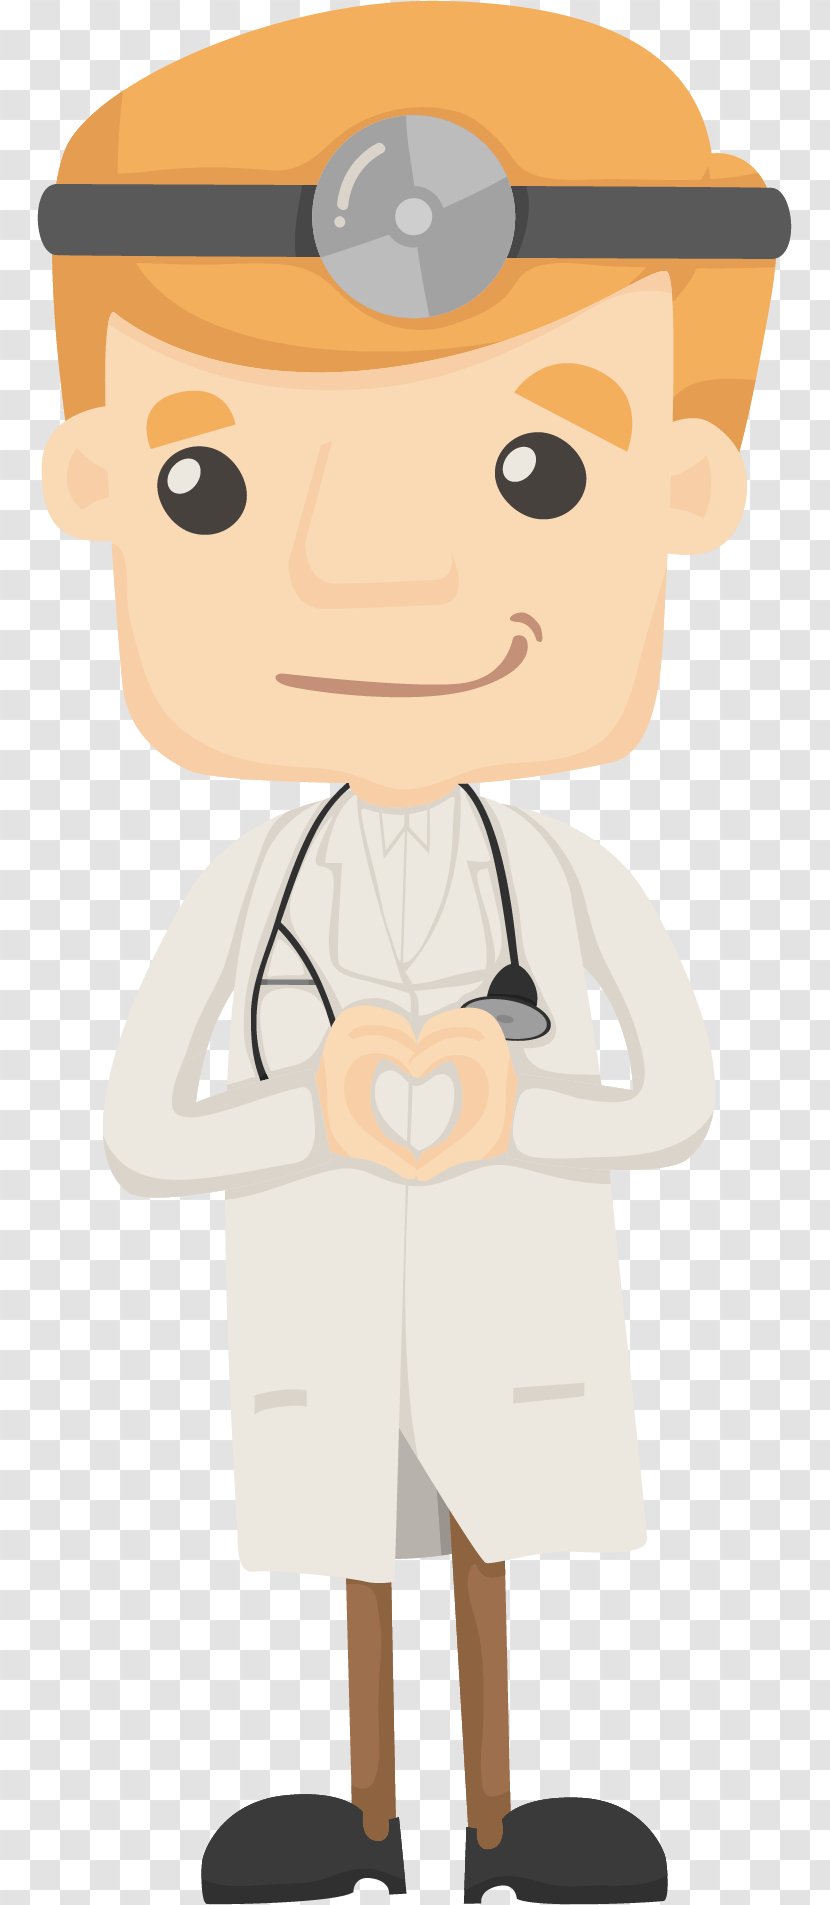 X-ray Physician Clip Art - Mascot - Smile Transparent PNG